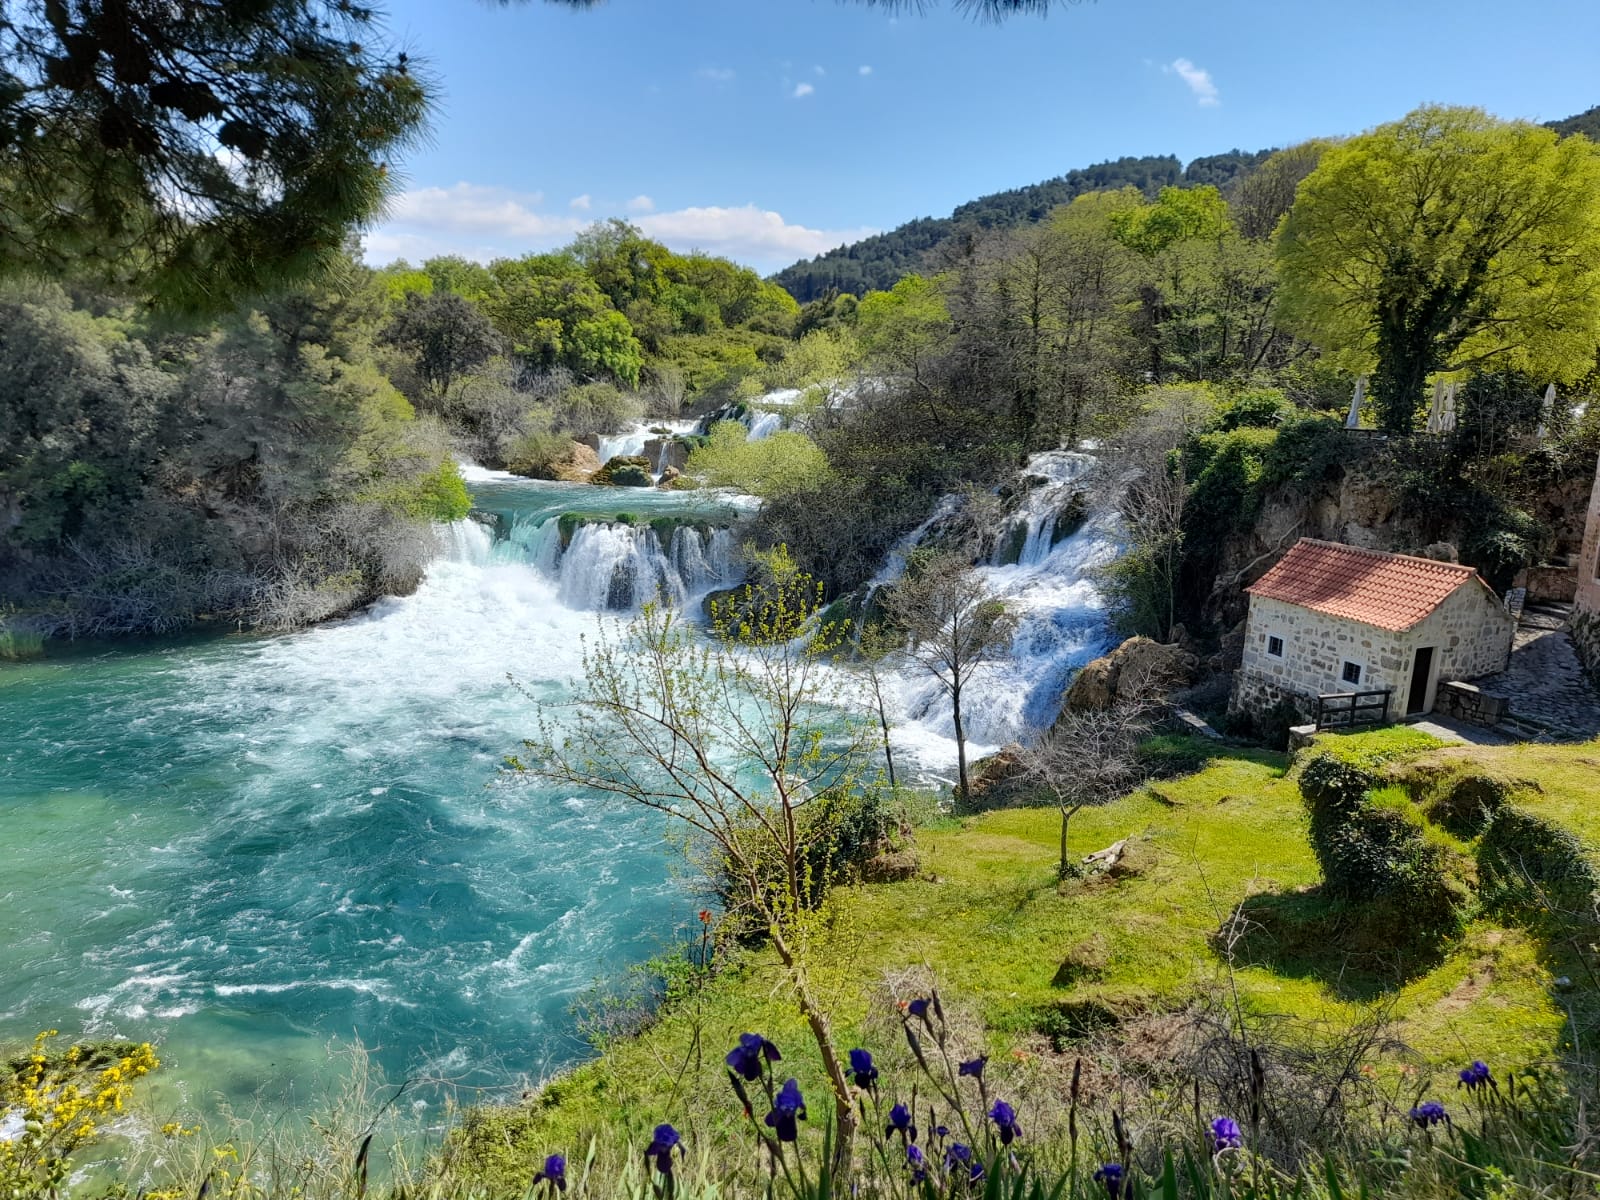 Magnificent scenes of the Krka River as seen through the eyes of our staff  - NP Krka